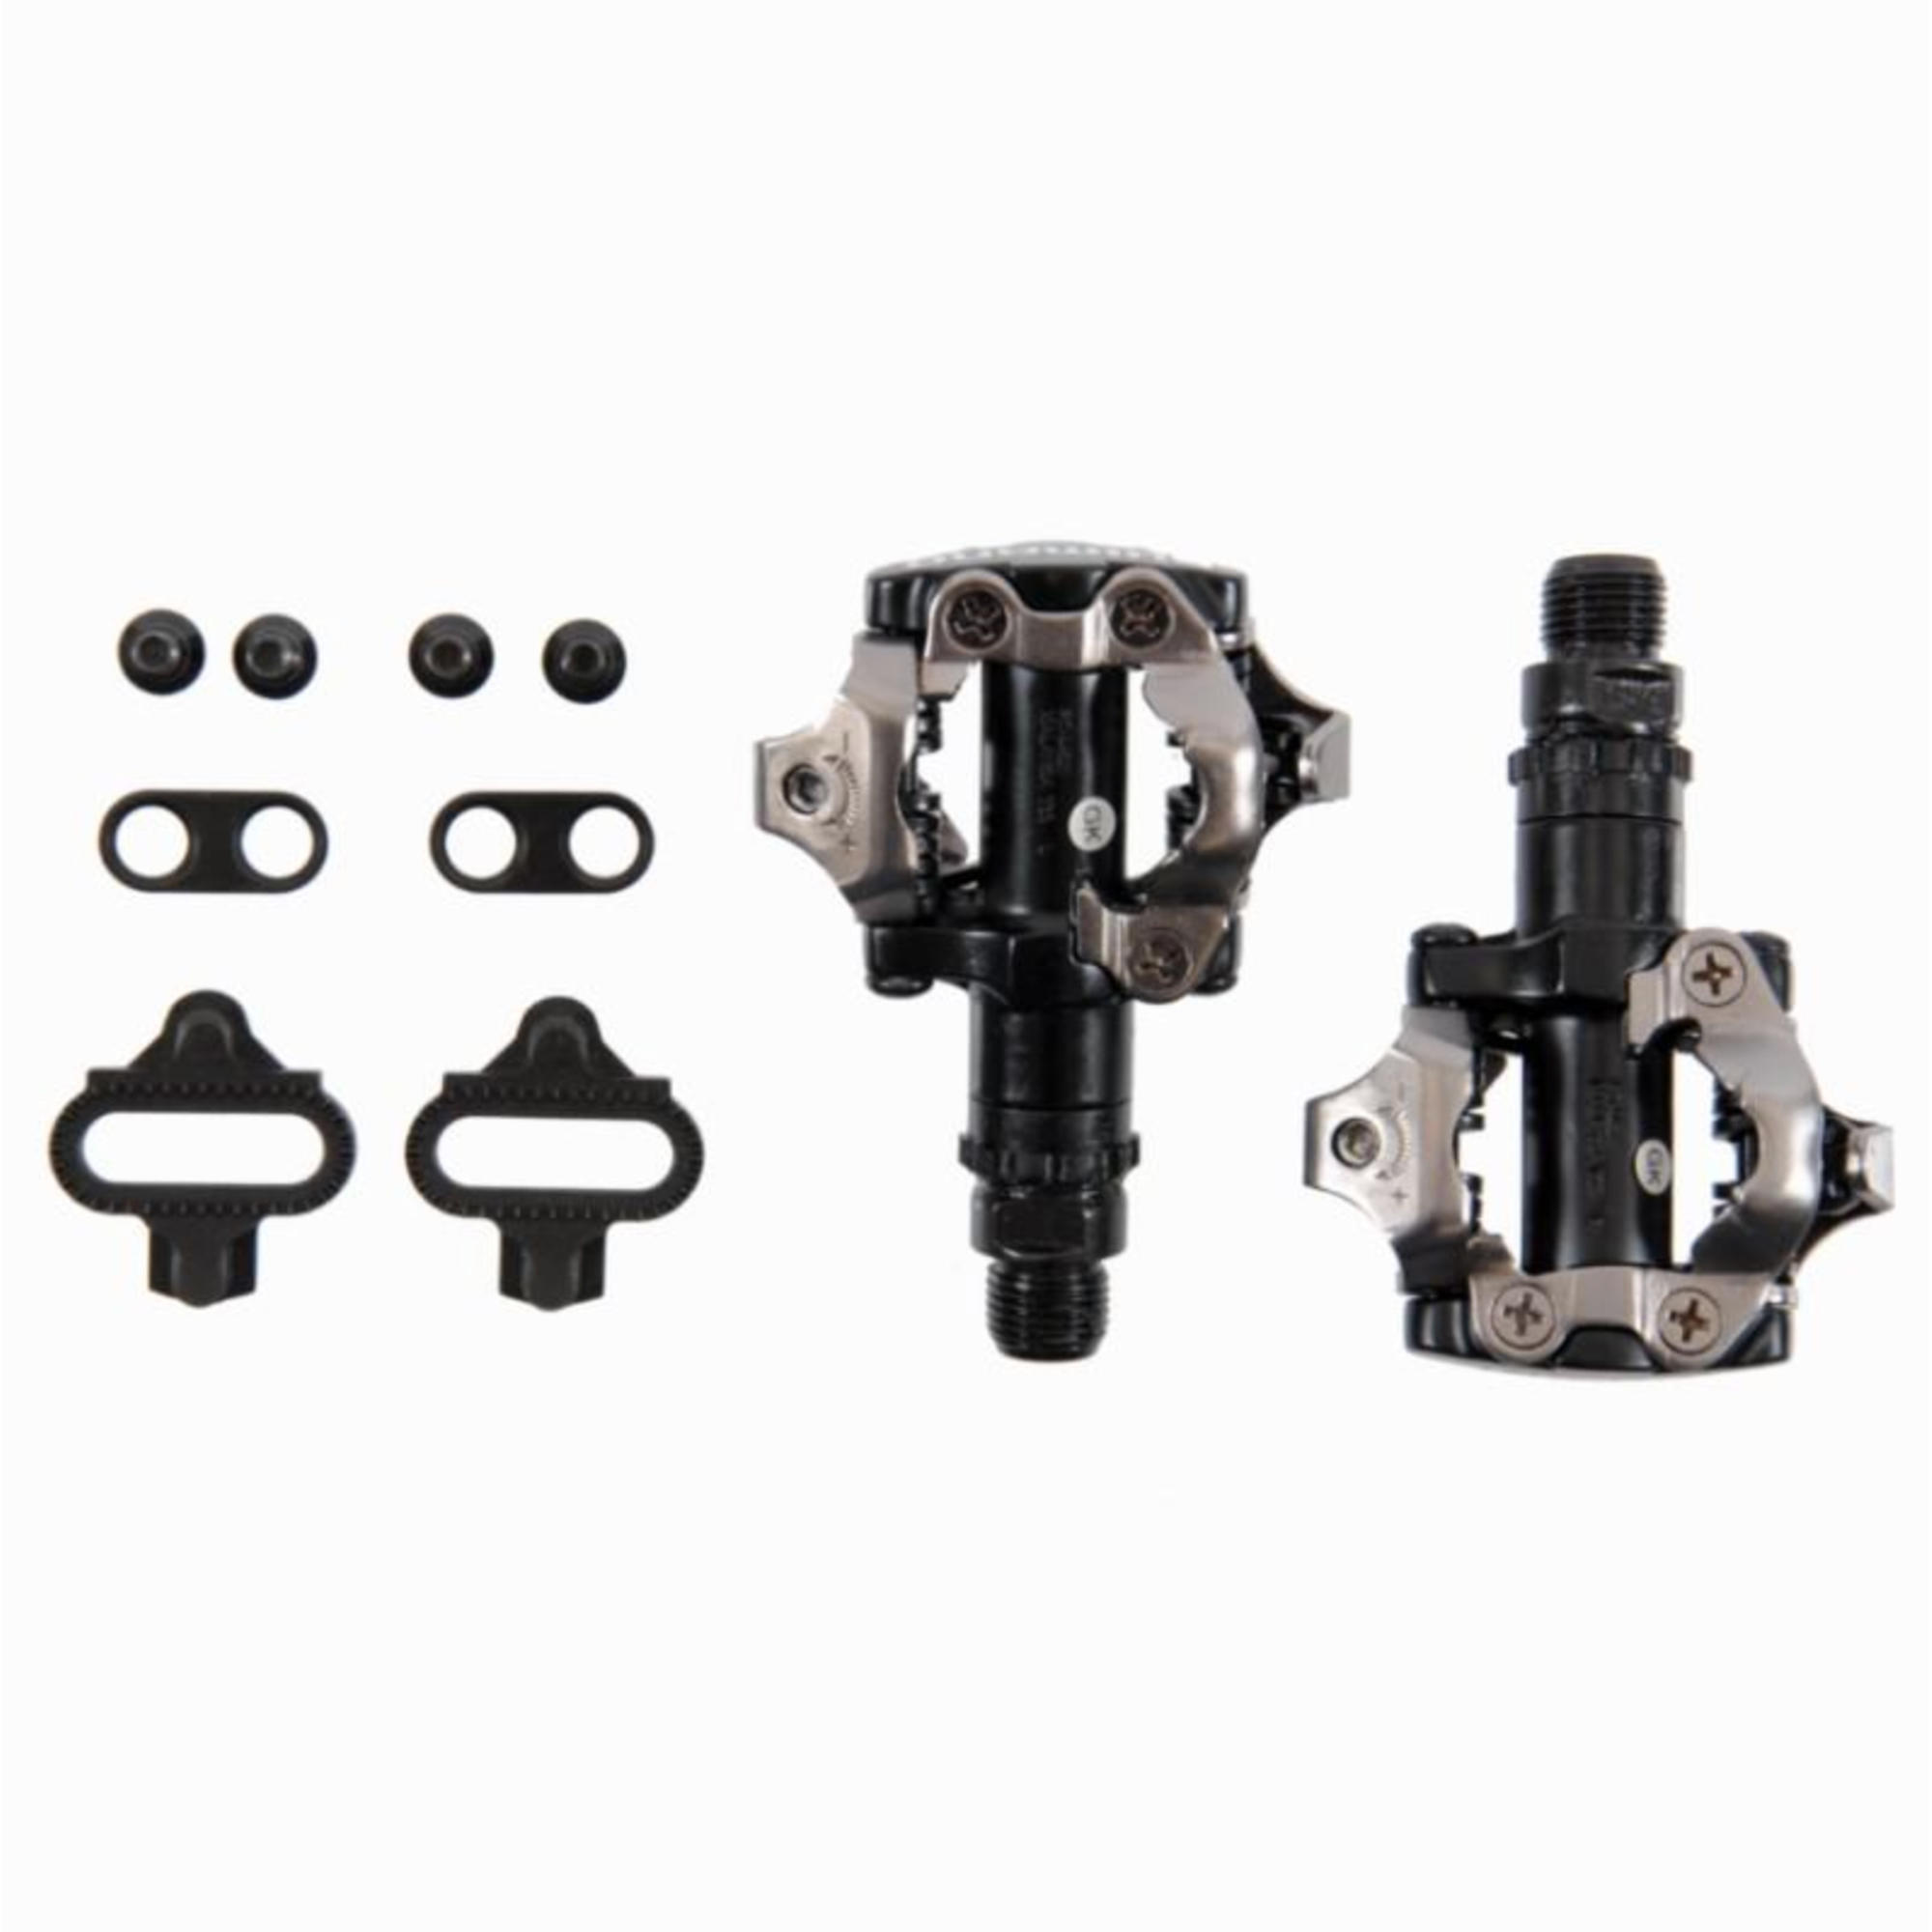 Clipless Mountain Bike Pedals M-520 